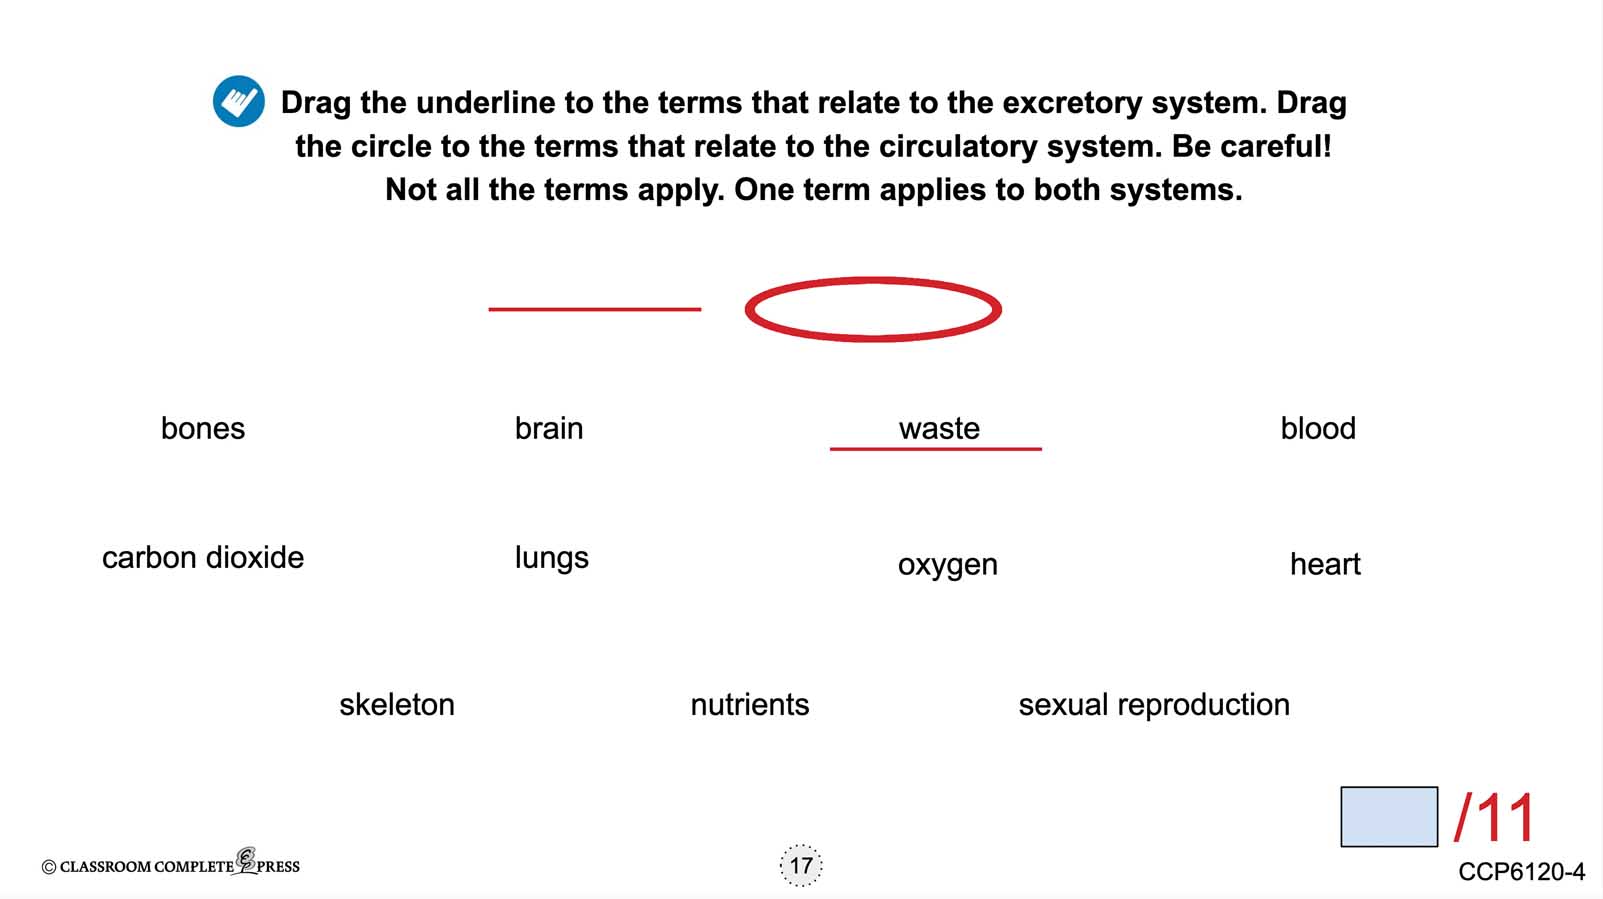 Cells, Skeletal & Muscular Systems: What Are Organs & Organ Systems? - Google Slides Gr. 5-8 - eBook